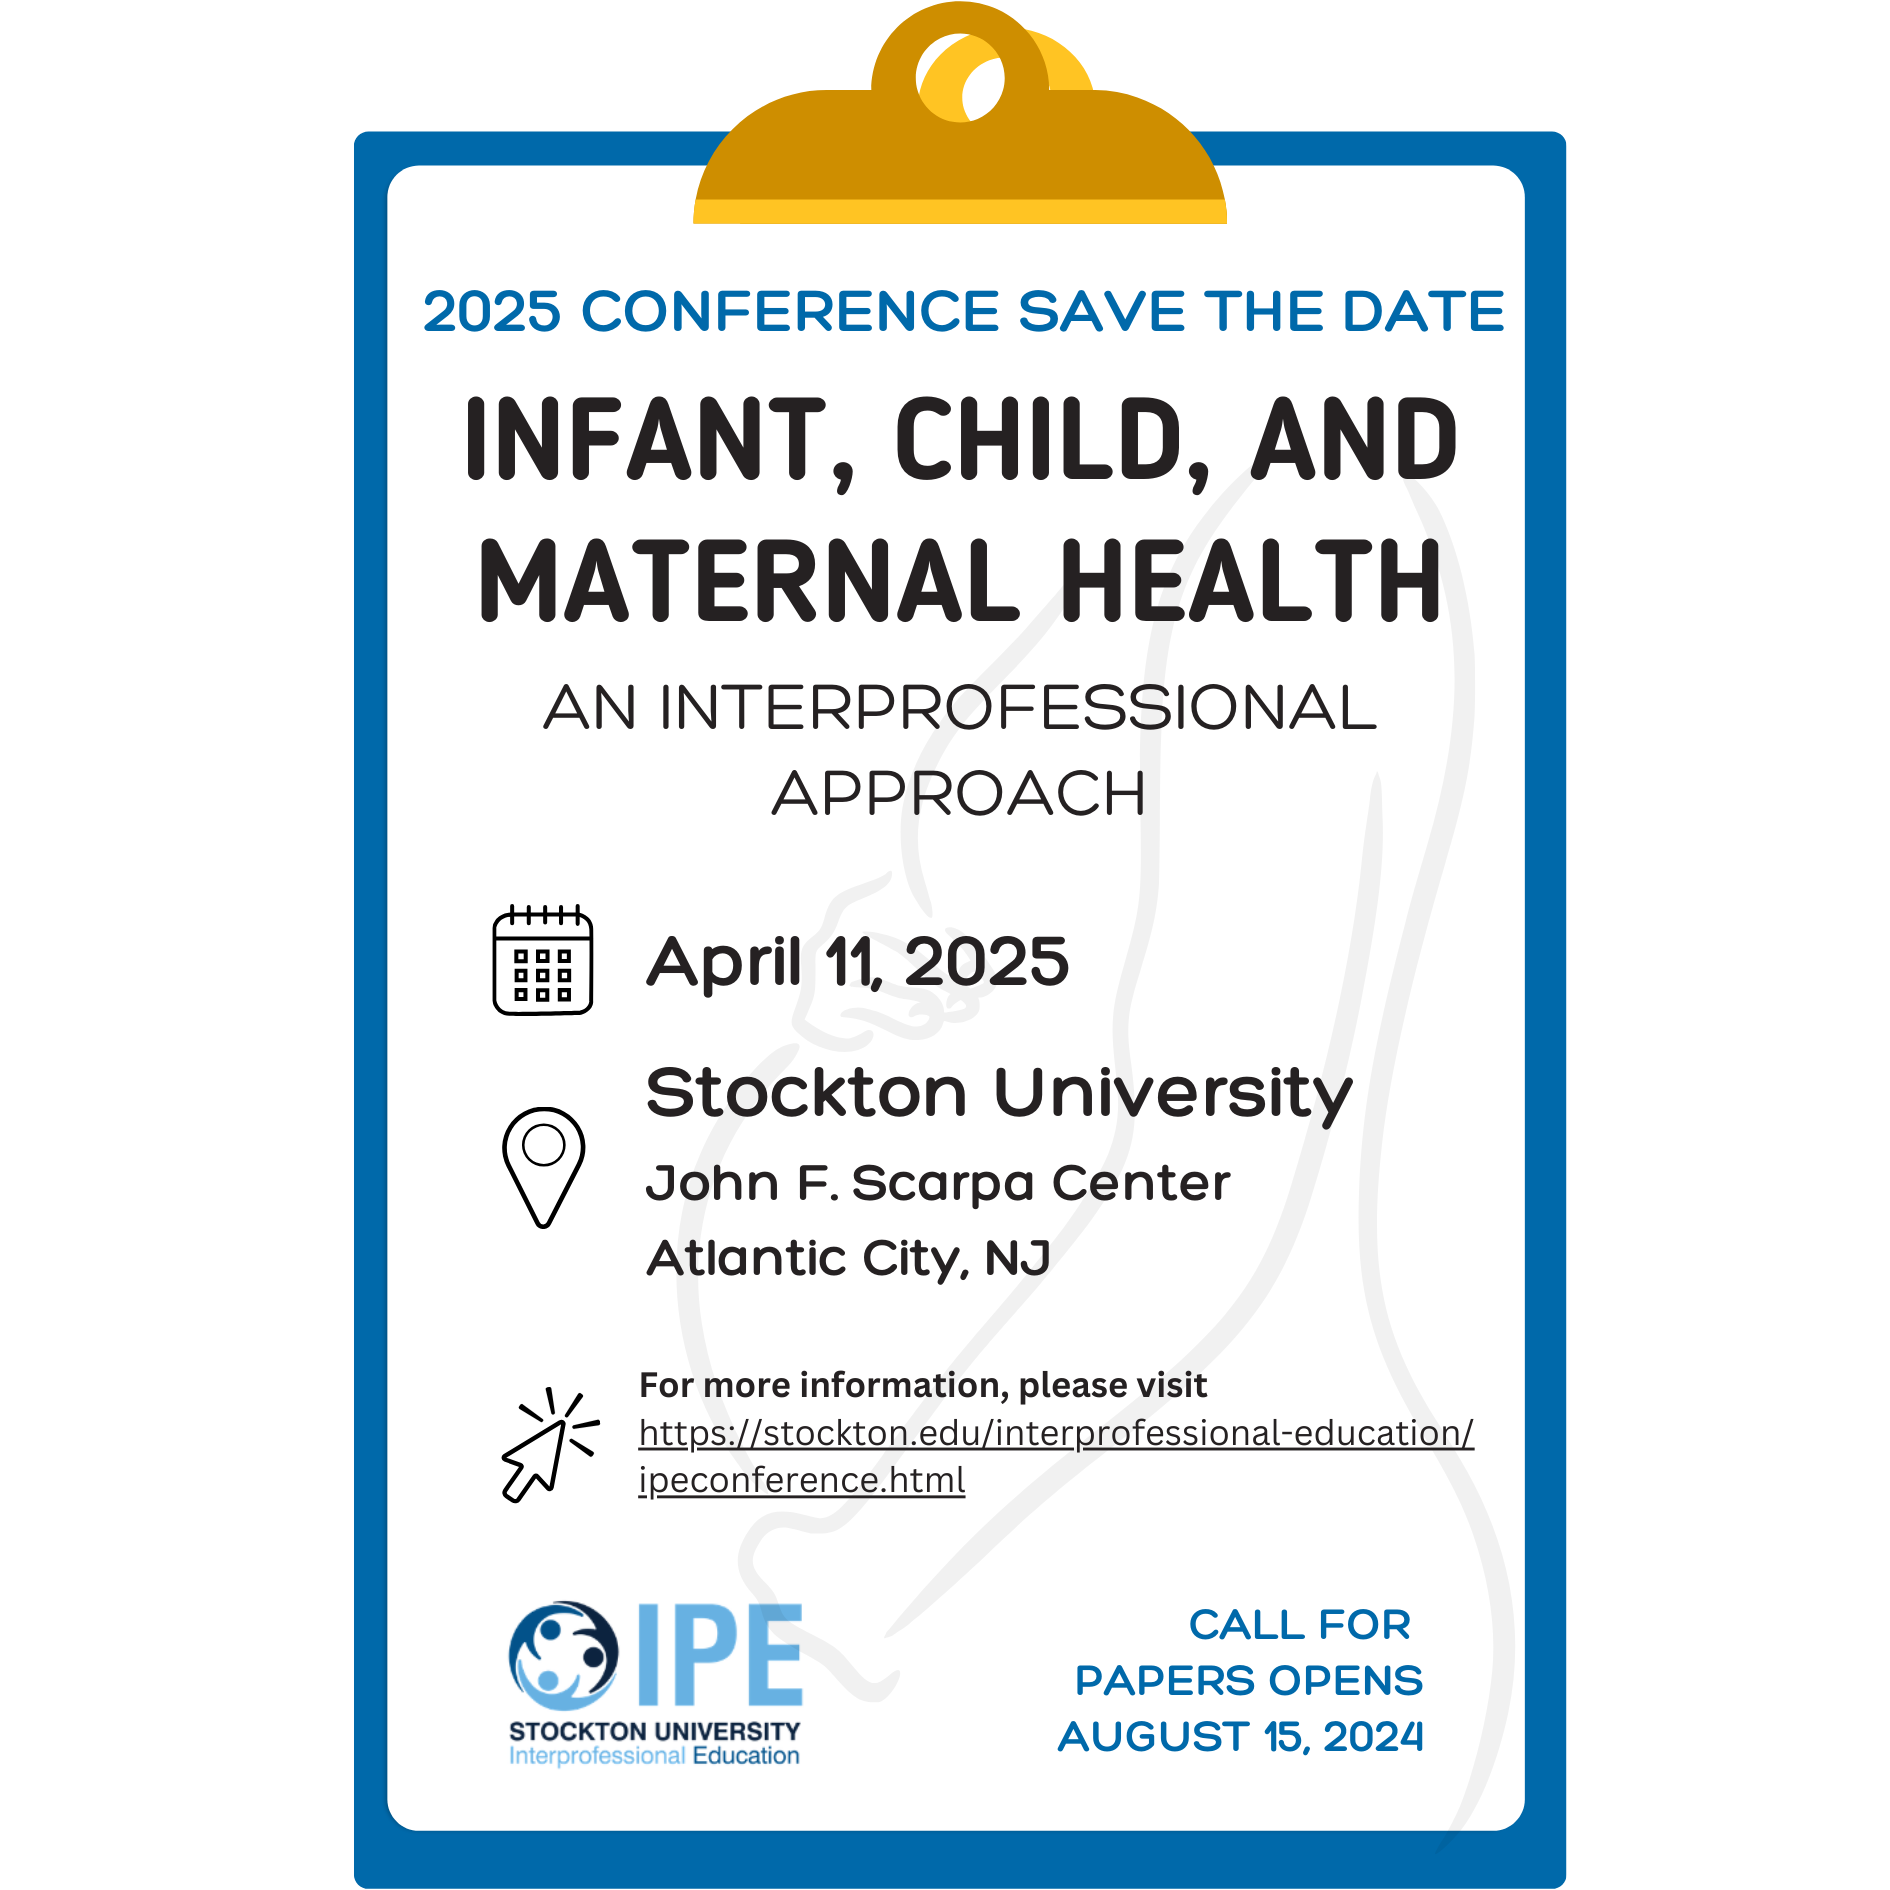 2025 Conference Save the Date. Infant, Child, and Maternal Health: An Interprofessional Approach. April 11, 2025. Stockton University, John F. Scarpa Center, Atlantic City, NJ. Call for papers opens August 15, 2024.